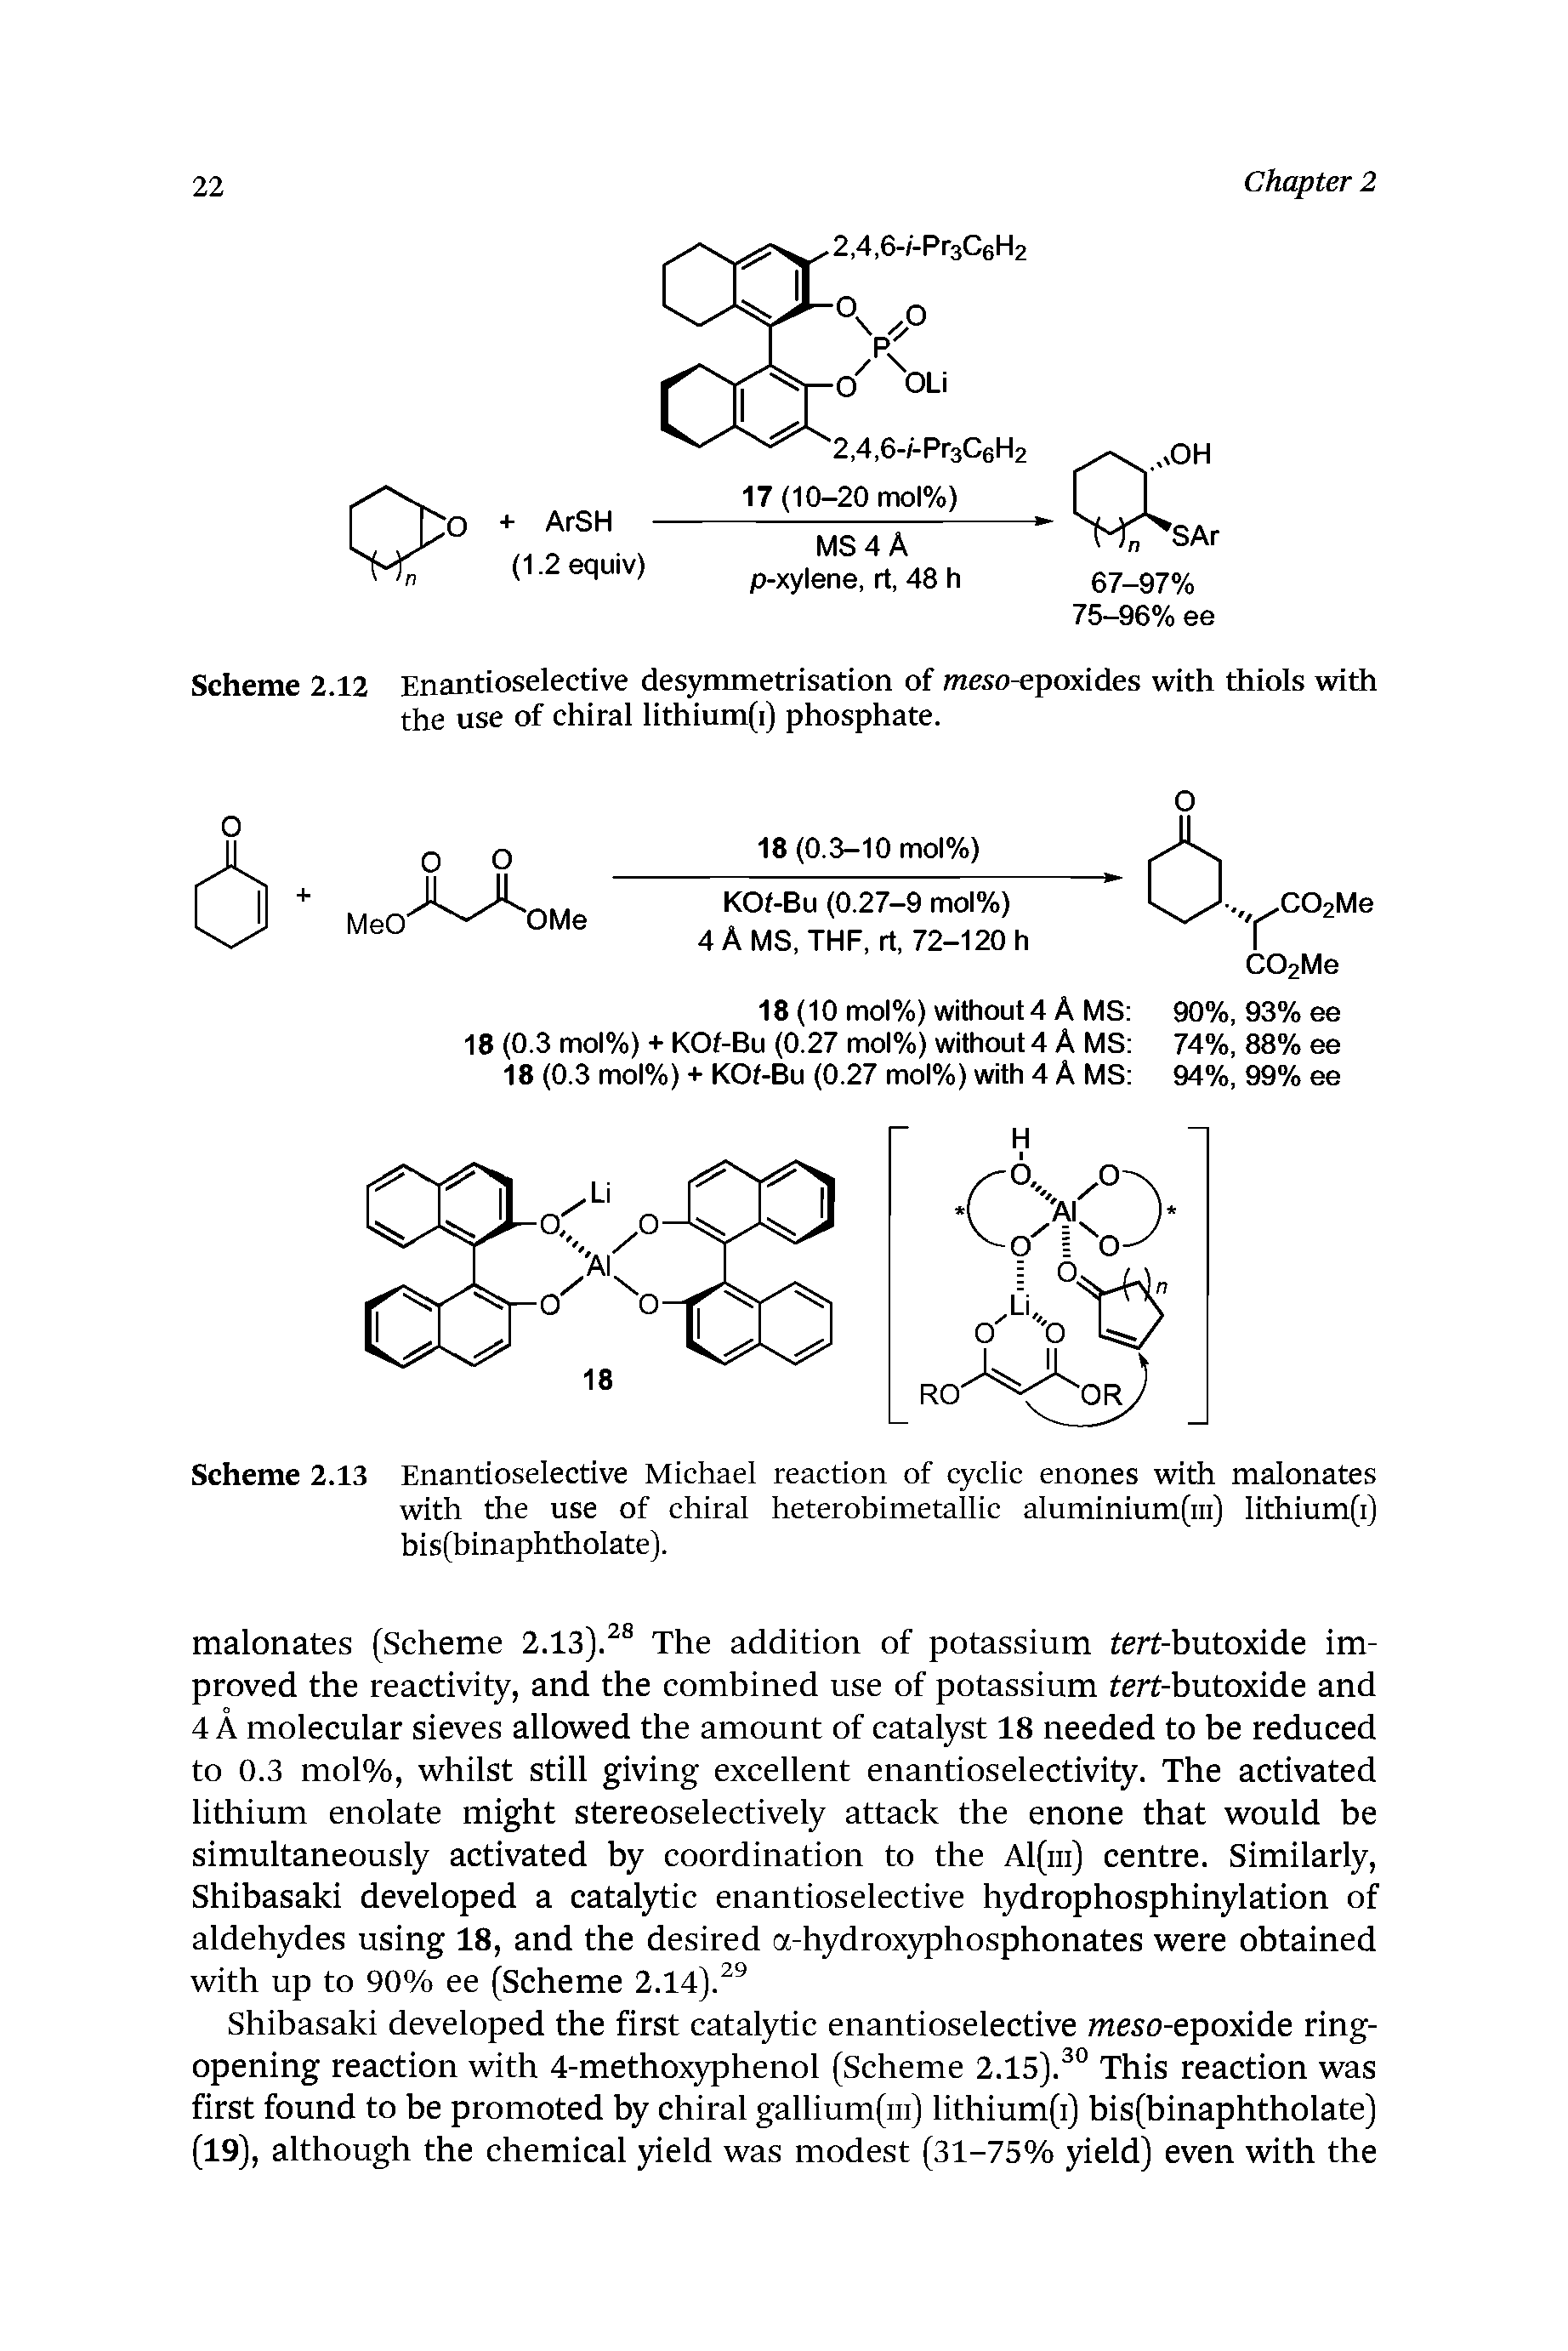 Scheme 2.12 Enantioselective desymmetrisation of meso-epoxides with thiols with the use of chiral lithium(i) phosphate.